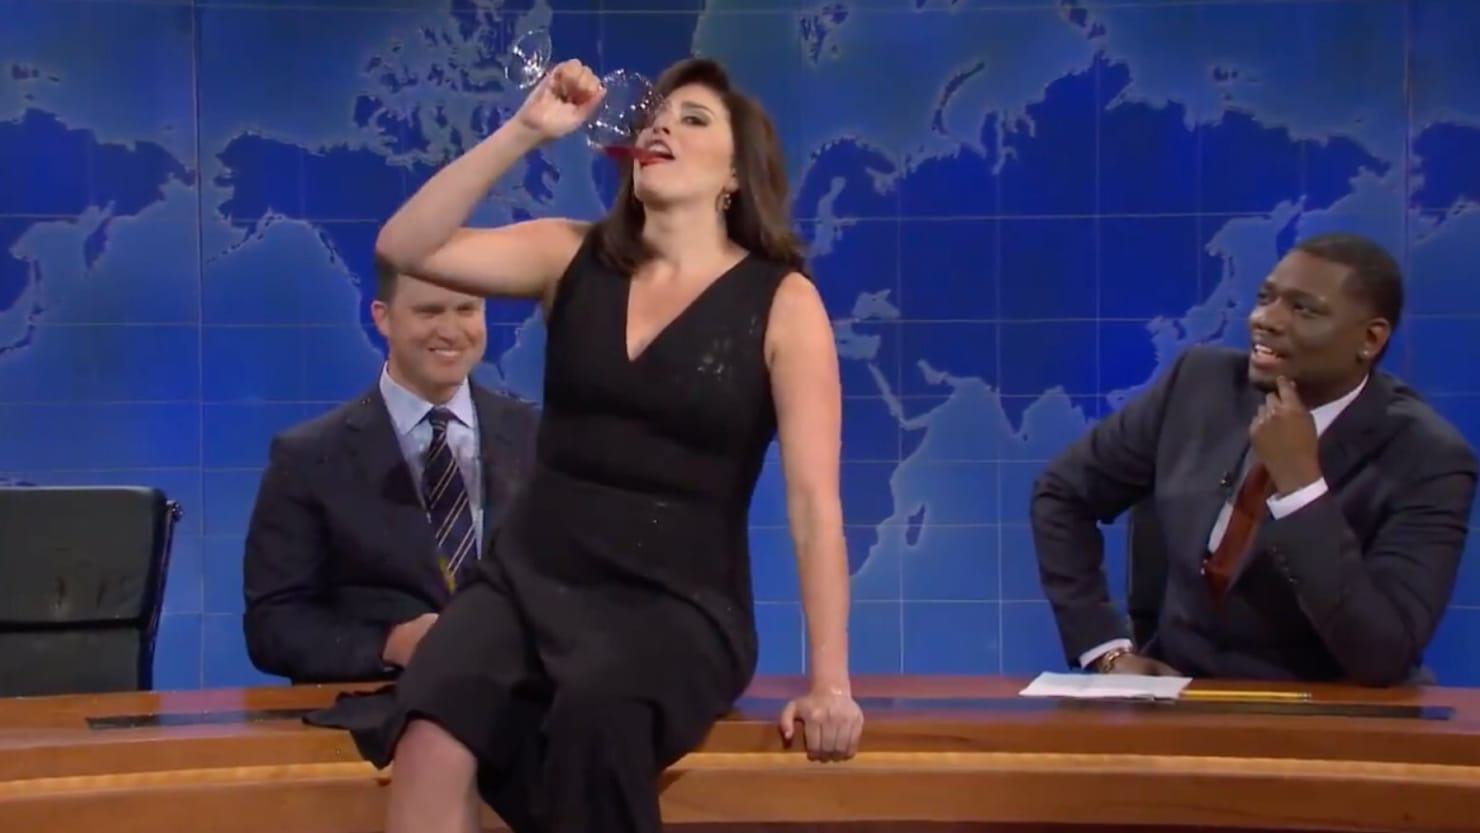 Cecily Strong's Jeanine Pirro Chugs Wine, Belts 'My Way' on 'SNL'